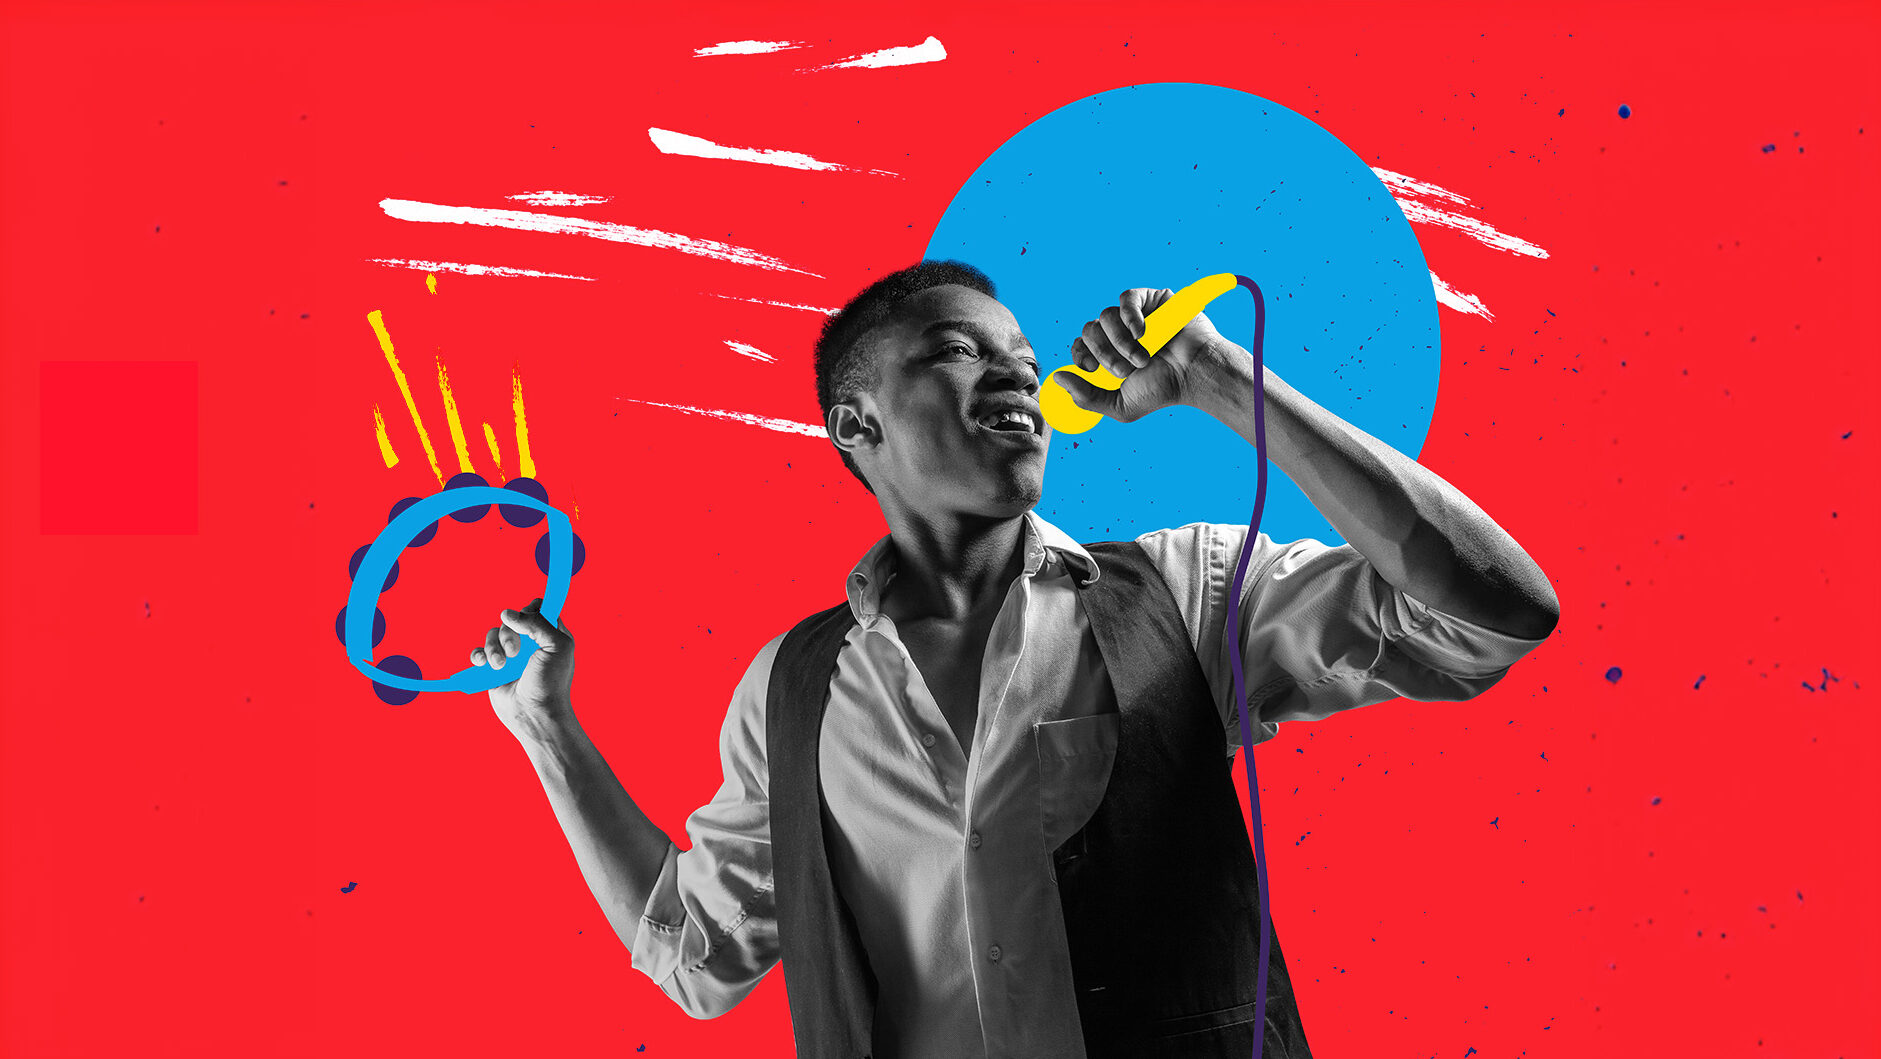 Singer with drawn microphone on bright colorful background. Contemporary art collage, modern design. Male model with brith drawings. Concept of music, art, creativity, inspiration